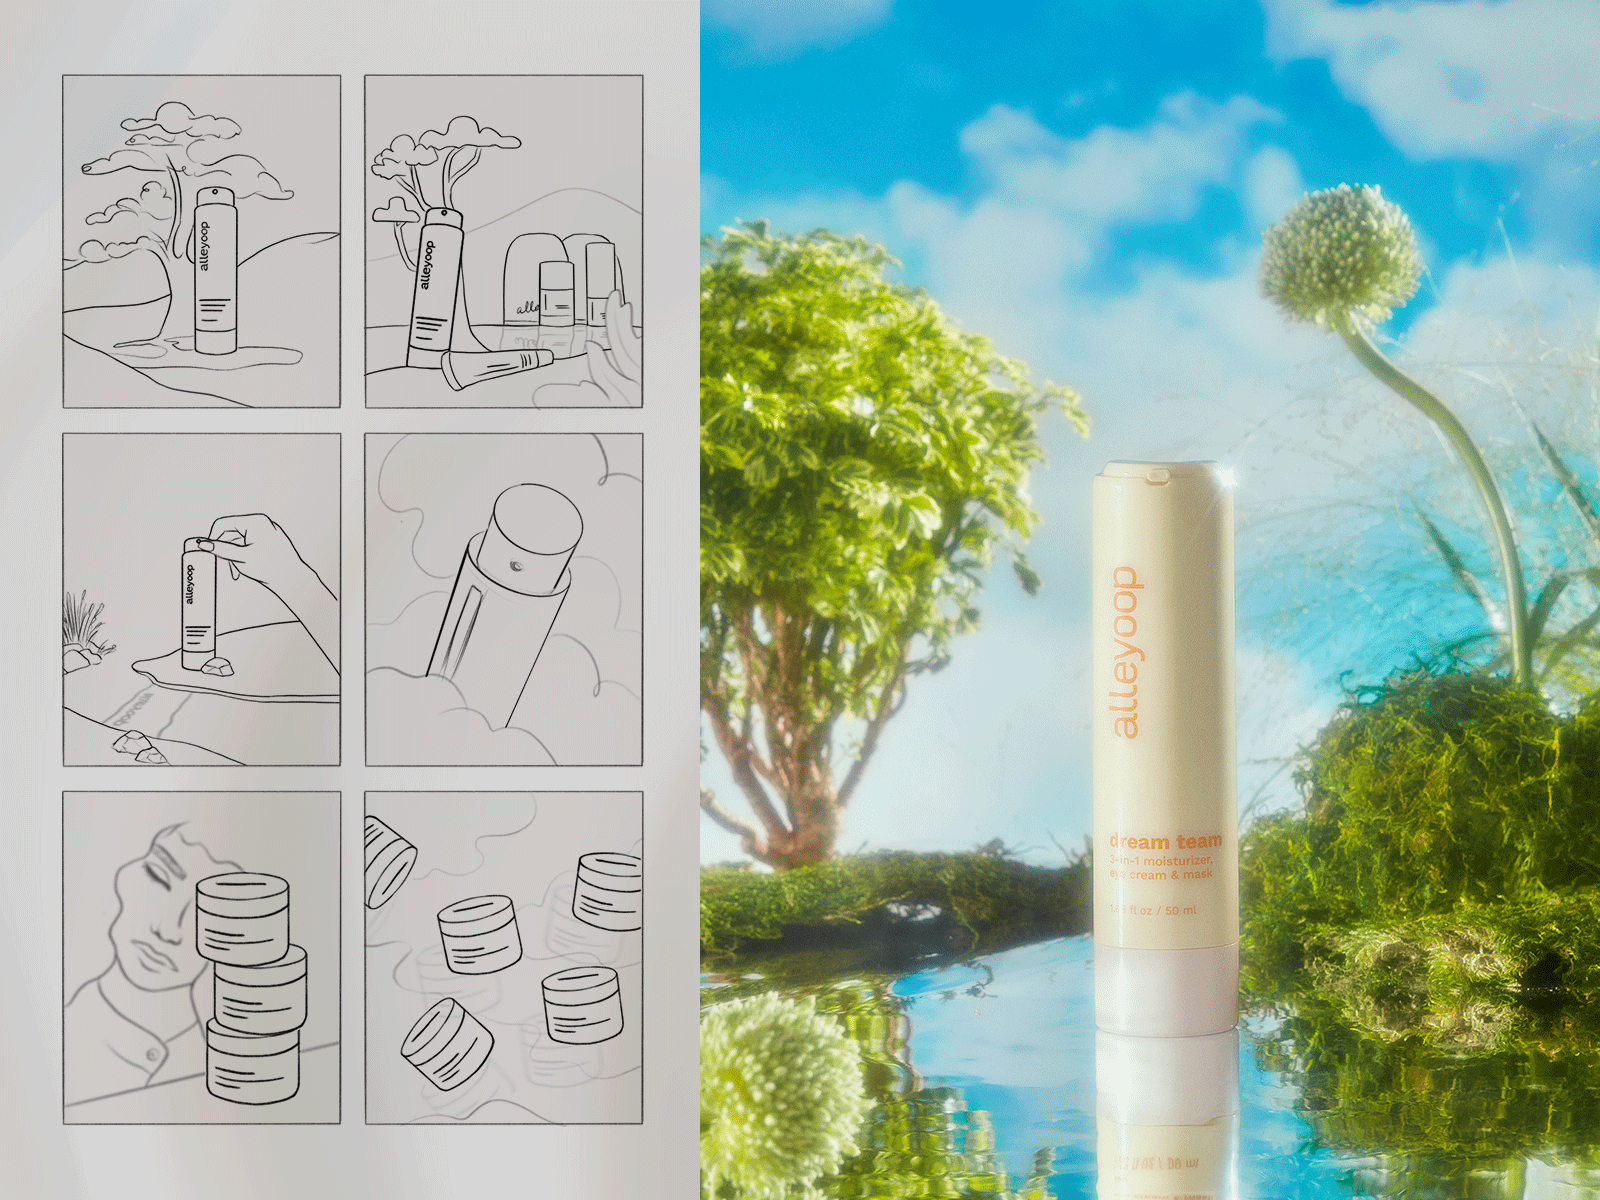 Dream Team | Art Direction art direction beauty branding campaign clouds cream dreamy identity illustration layout lifestyle marketing photography product sketch whimsical